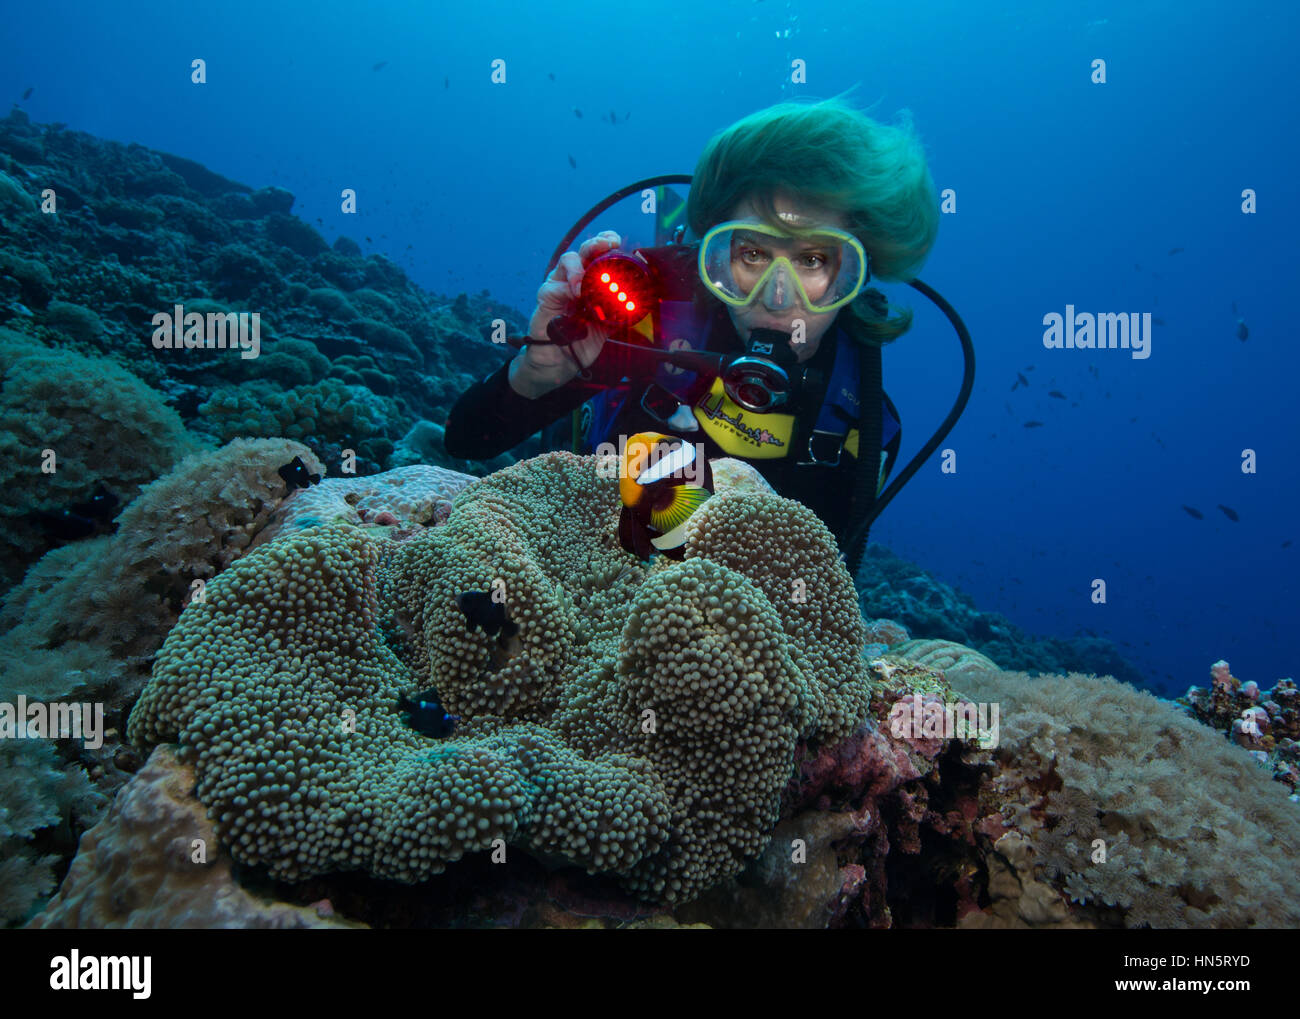 Diver shines underwater light on a Clark's anemonefish. Stock Photo